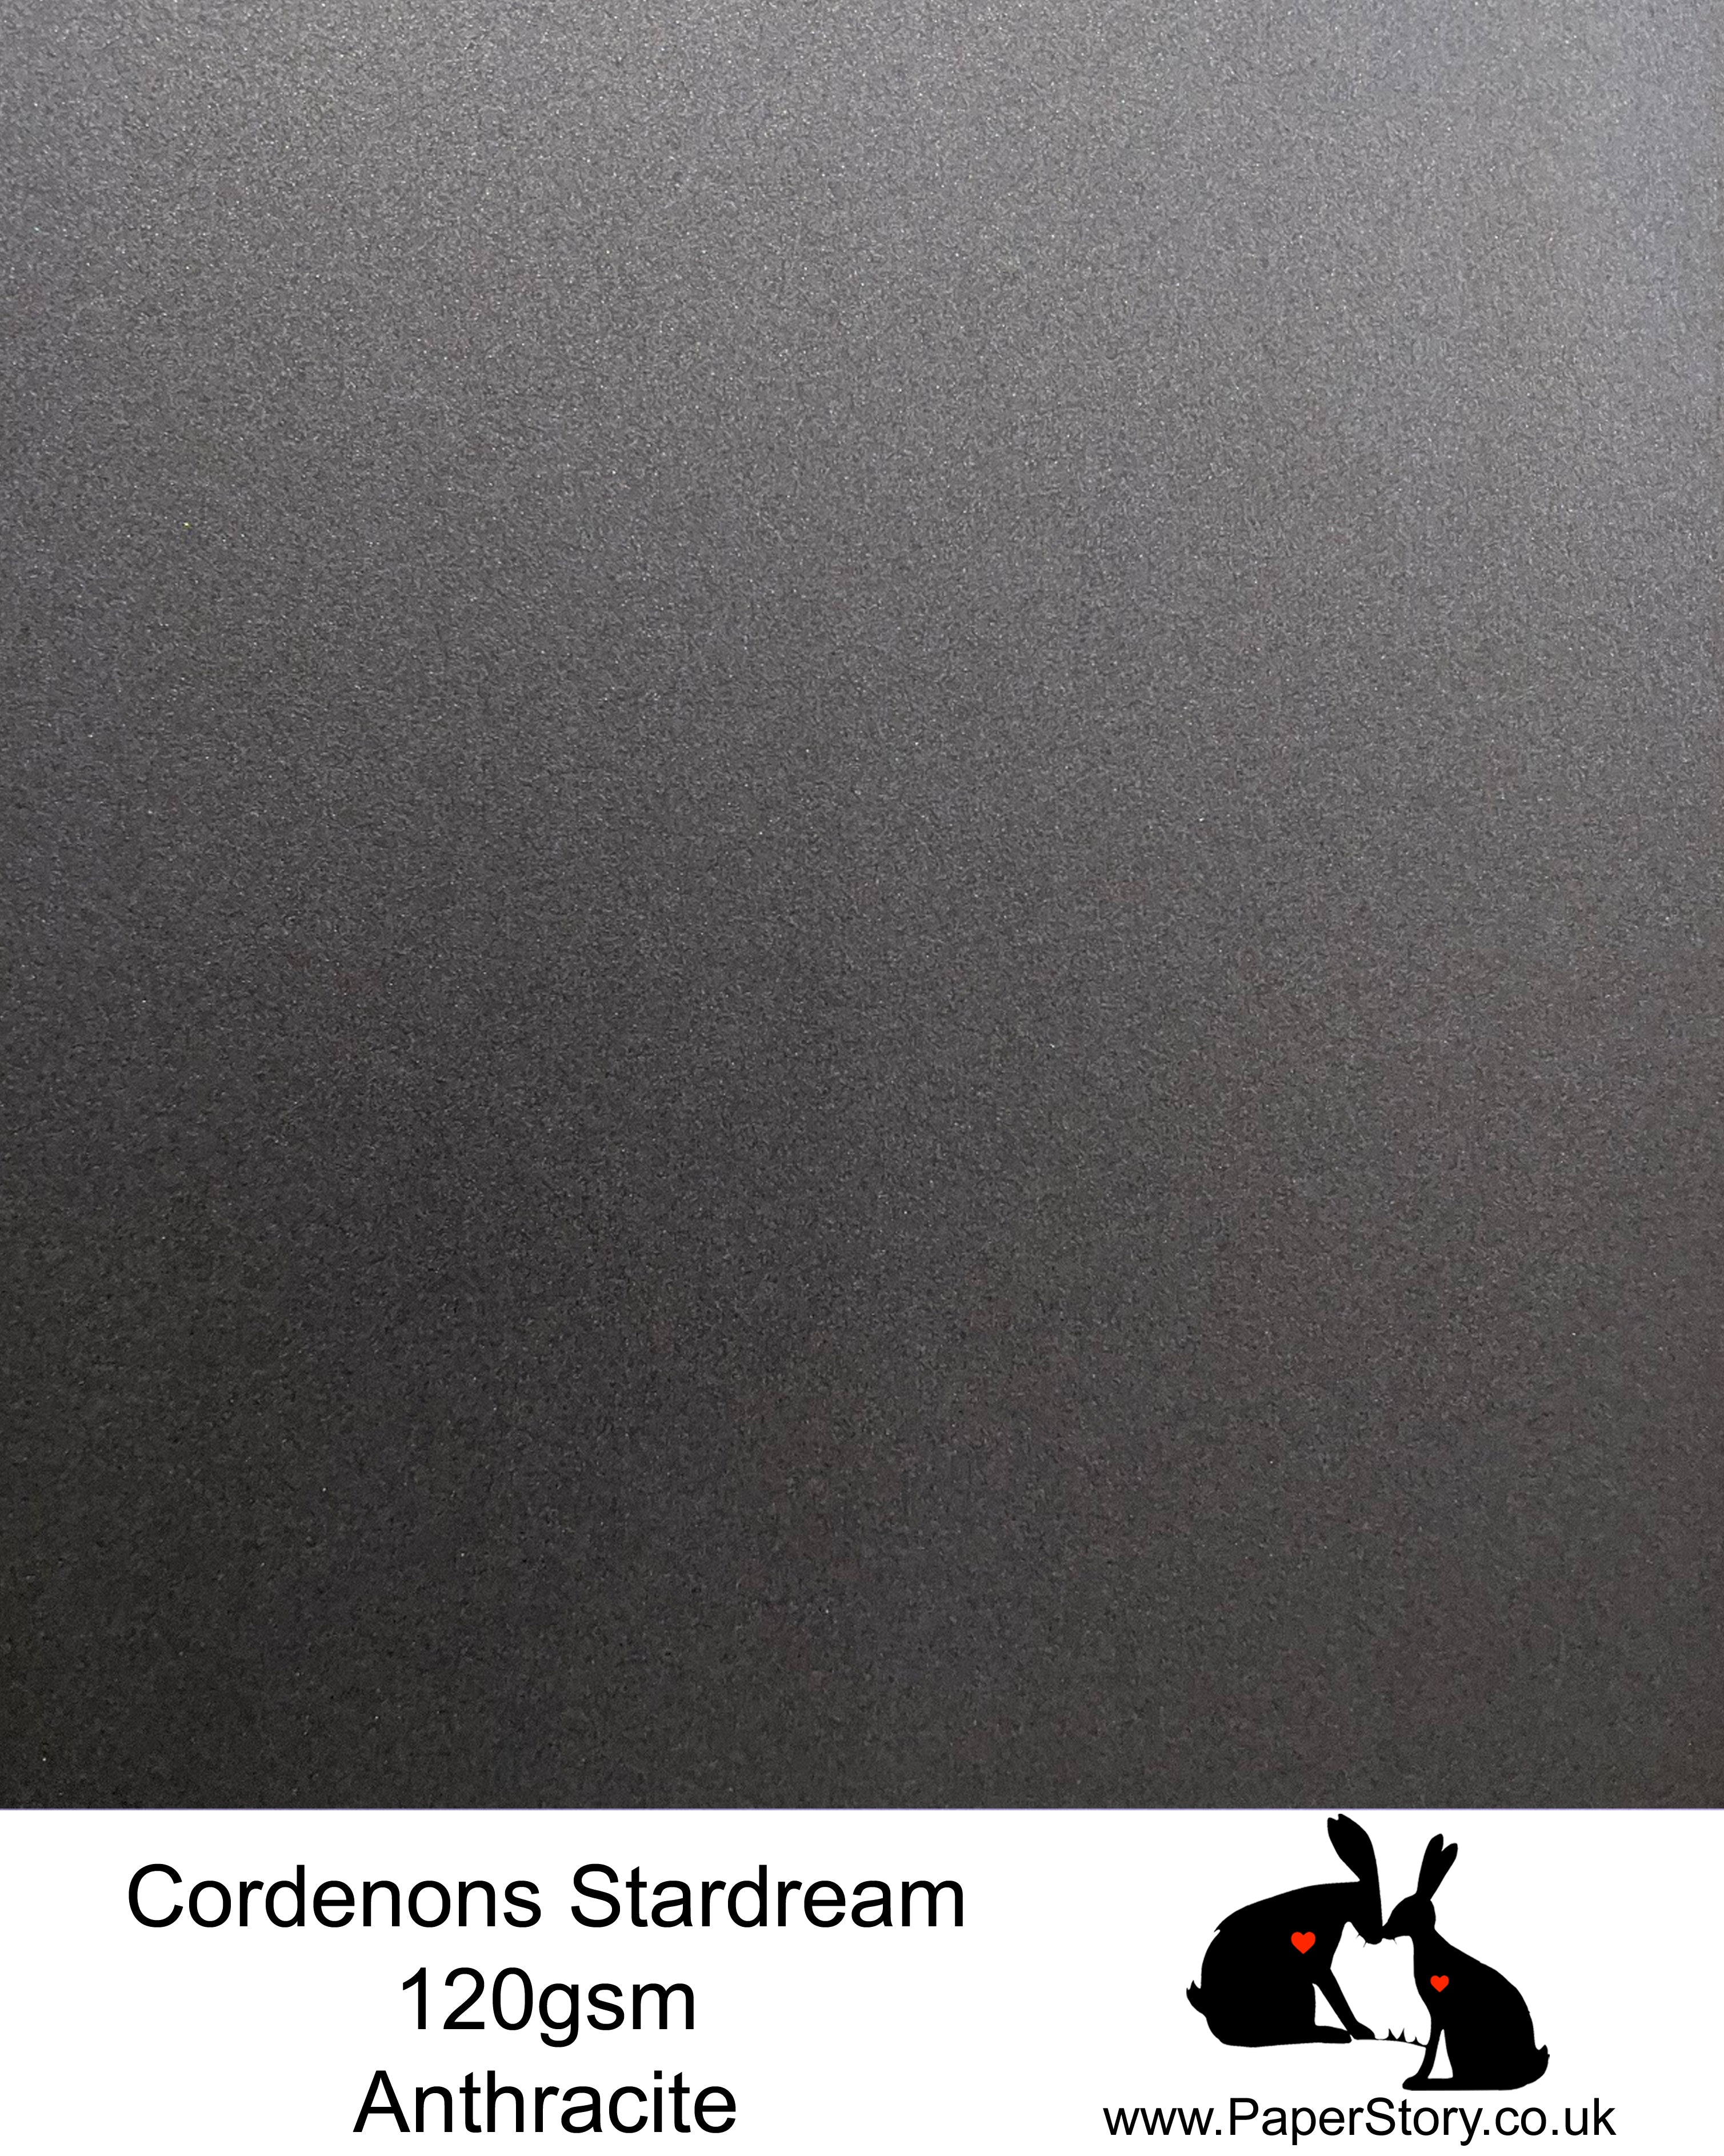 A4 Stardream 120gsm paper for Papercutting, craft, flower making  and wedding stationery. Stardream is a luxury Italian paper from Italy, it is a double sided quality Pearlescent paper with a matching colour core. FSC Certified, acid free, archival and PH Neutral